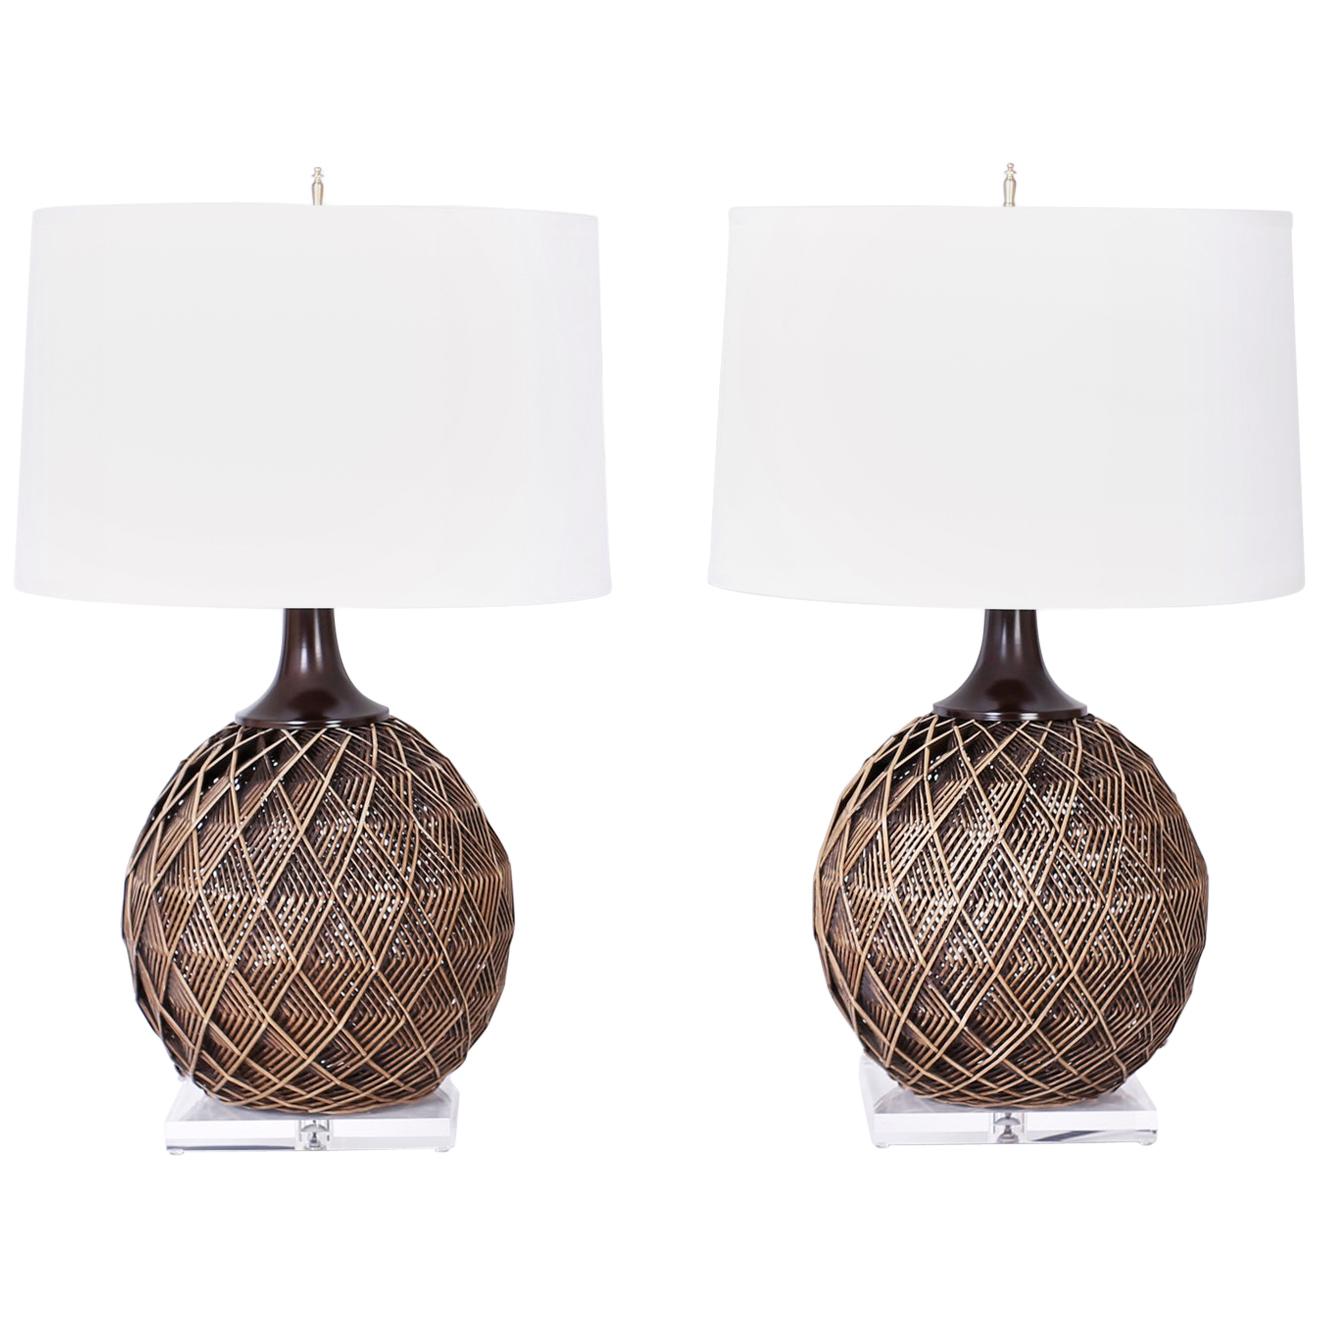 Pair of Woven Rattan or Reed Table Lamps